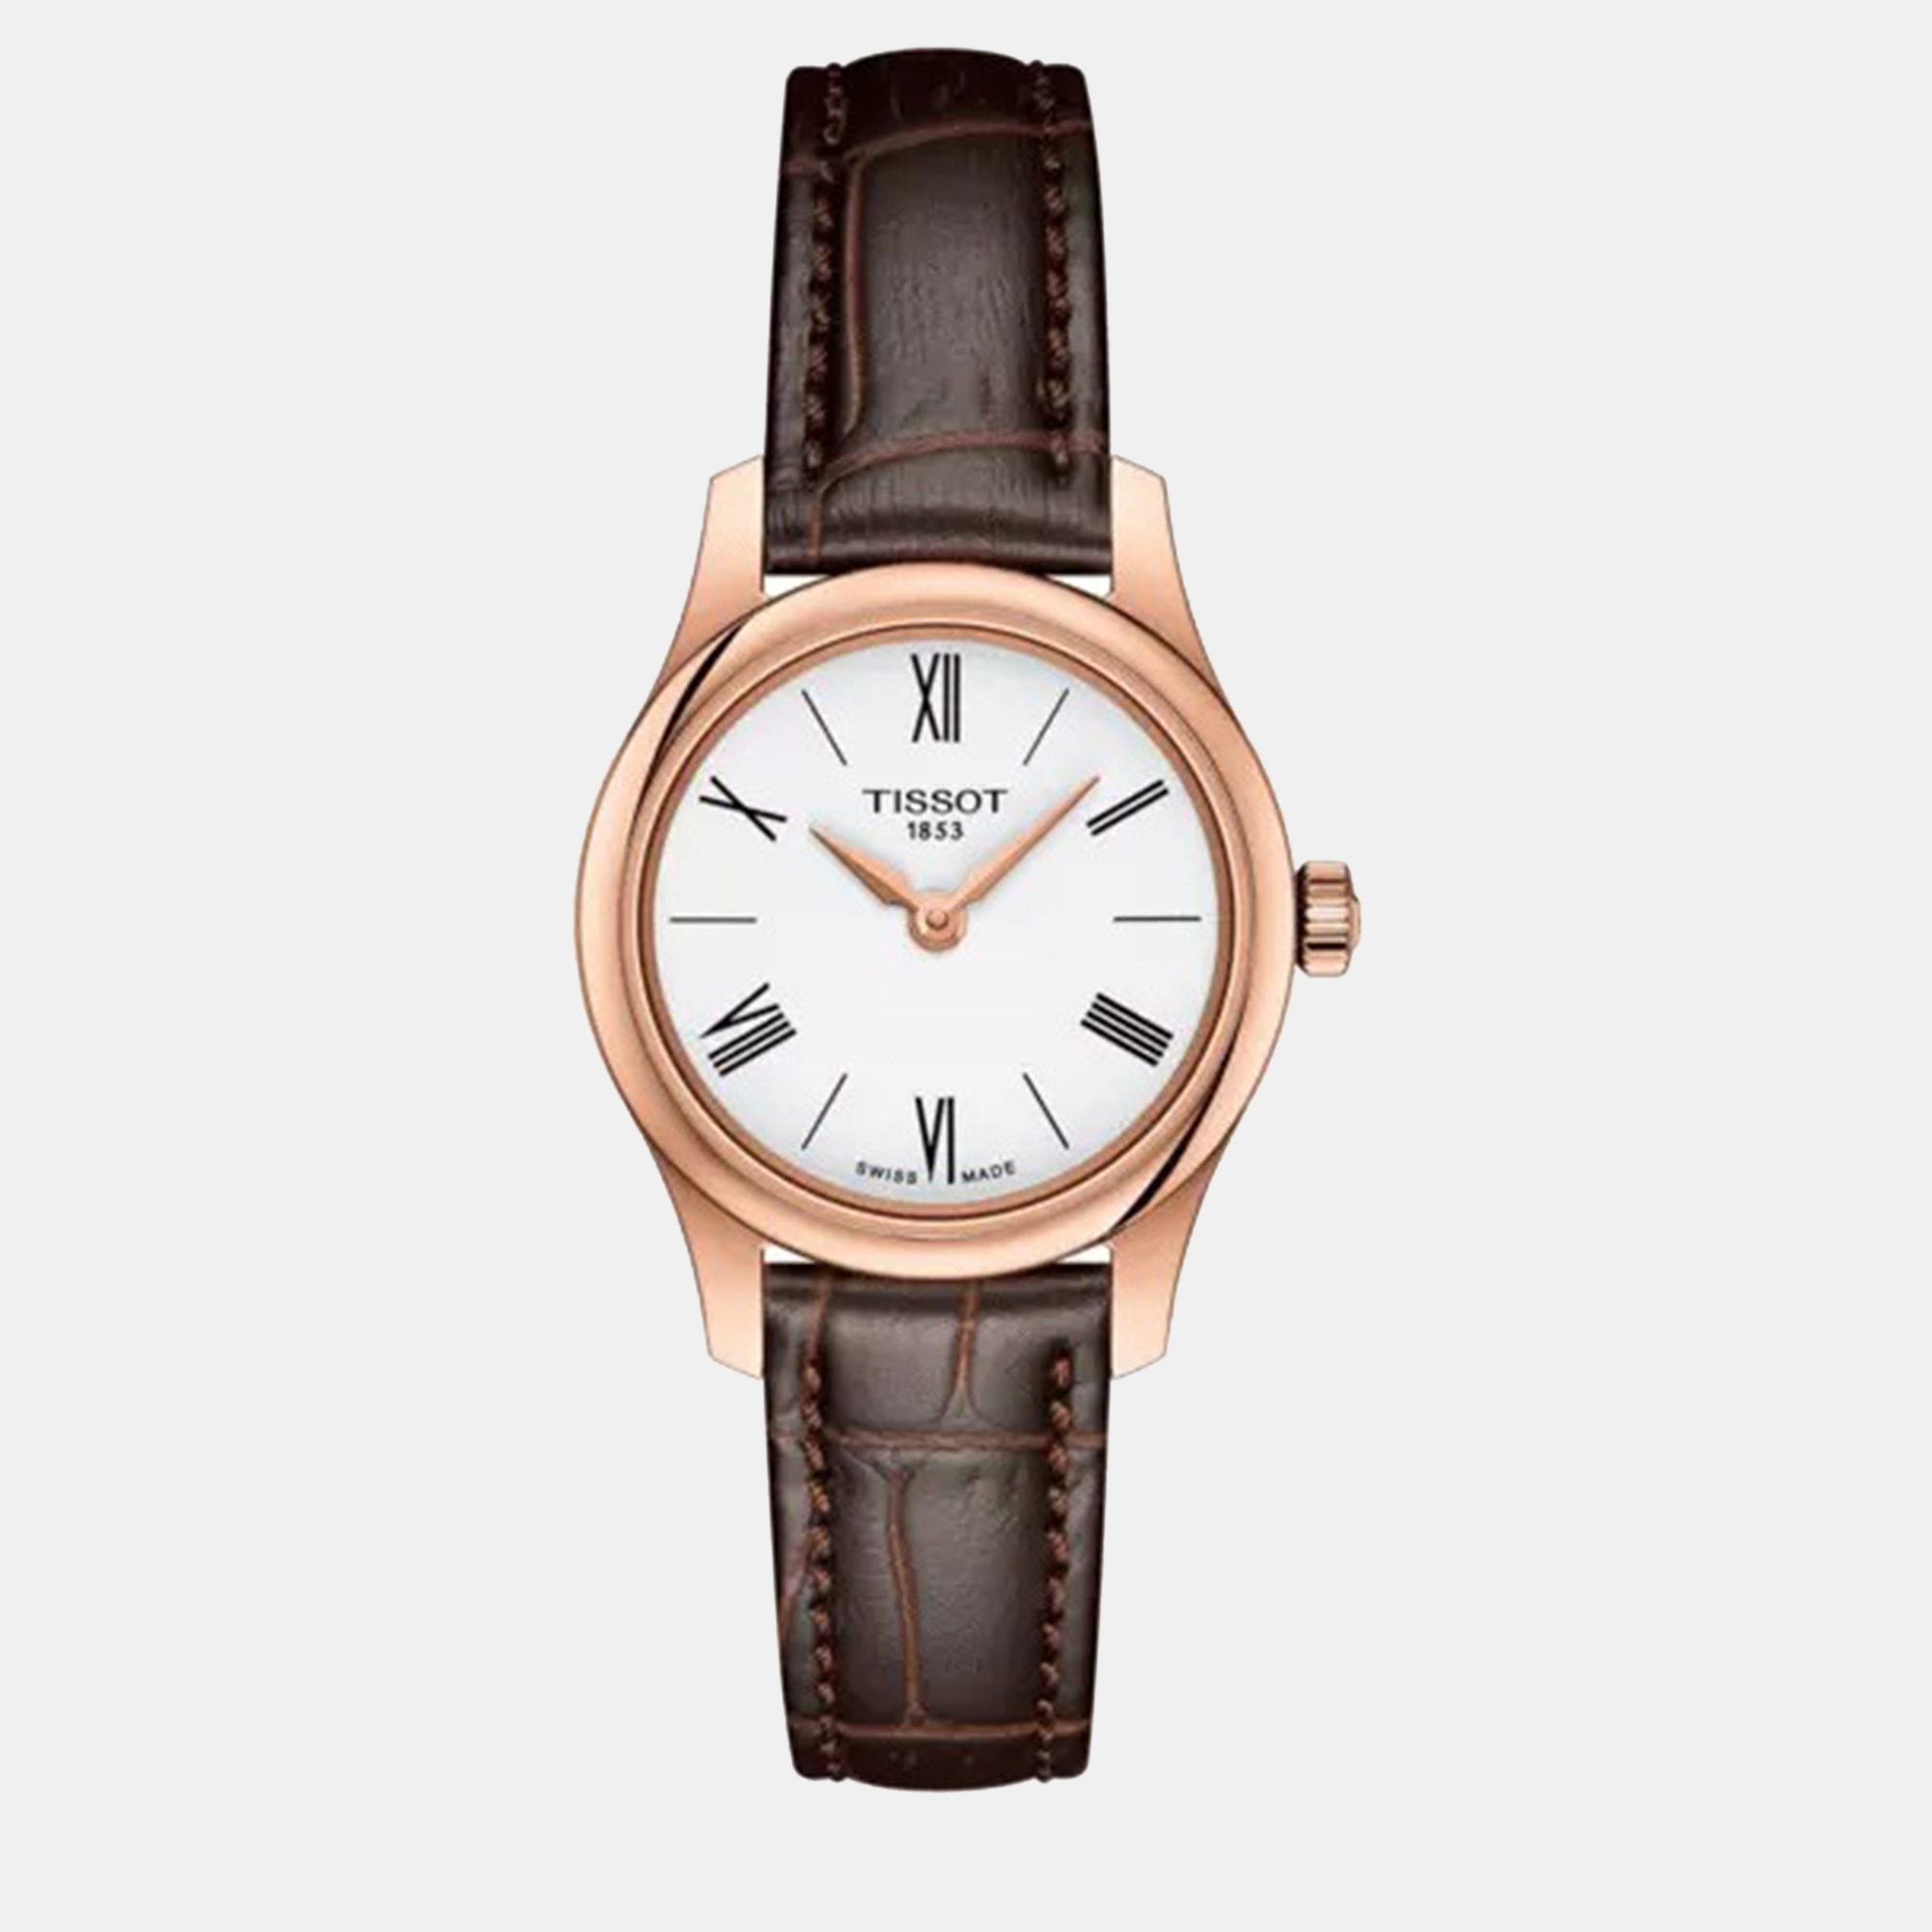 Tissot rose gold stainless steel leather watch 25 mm